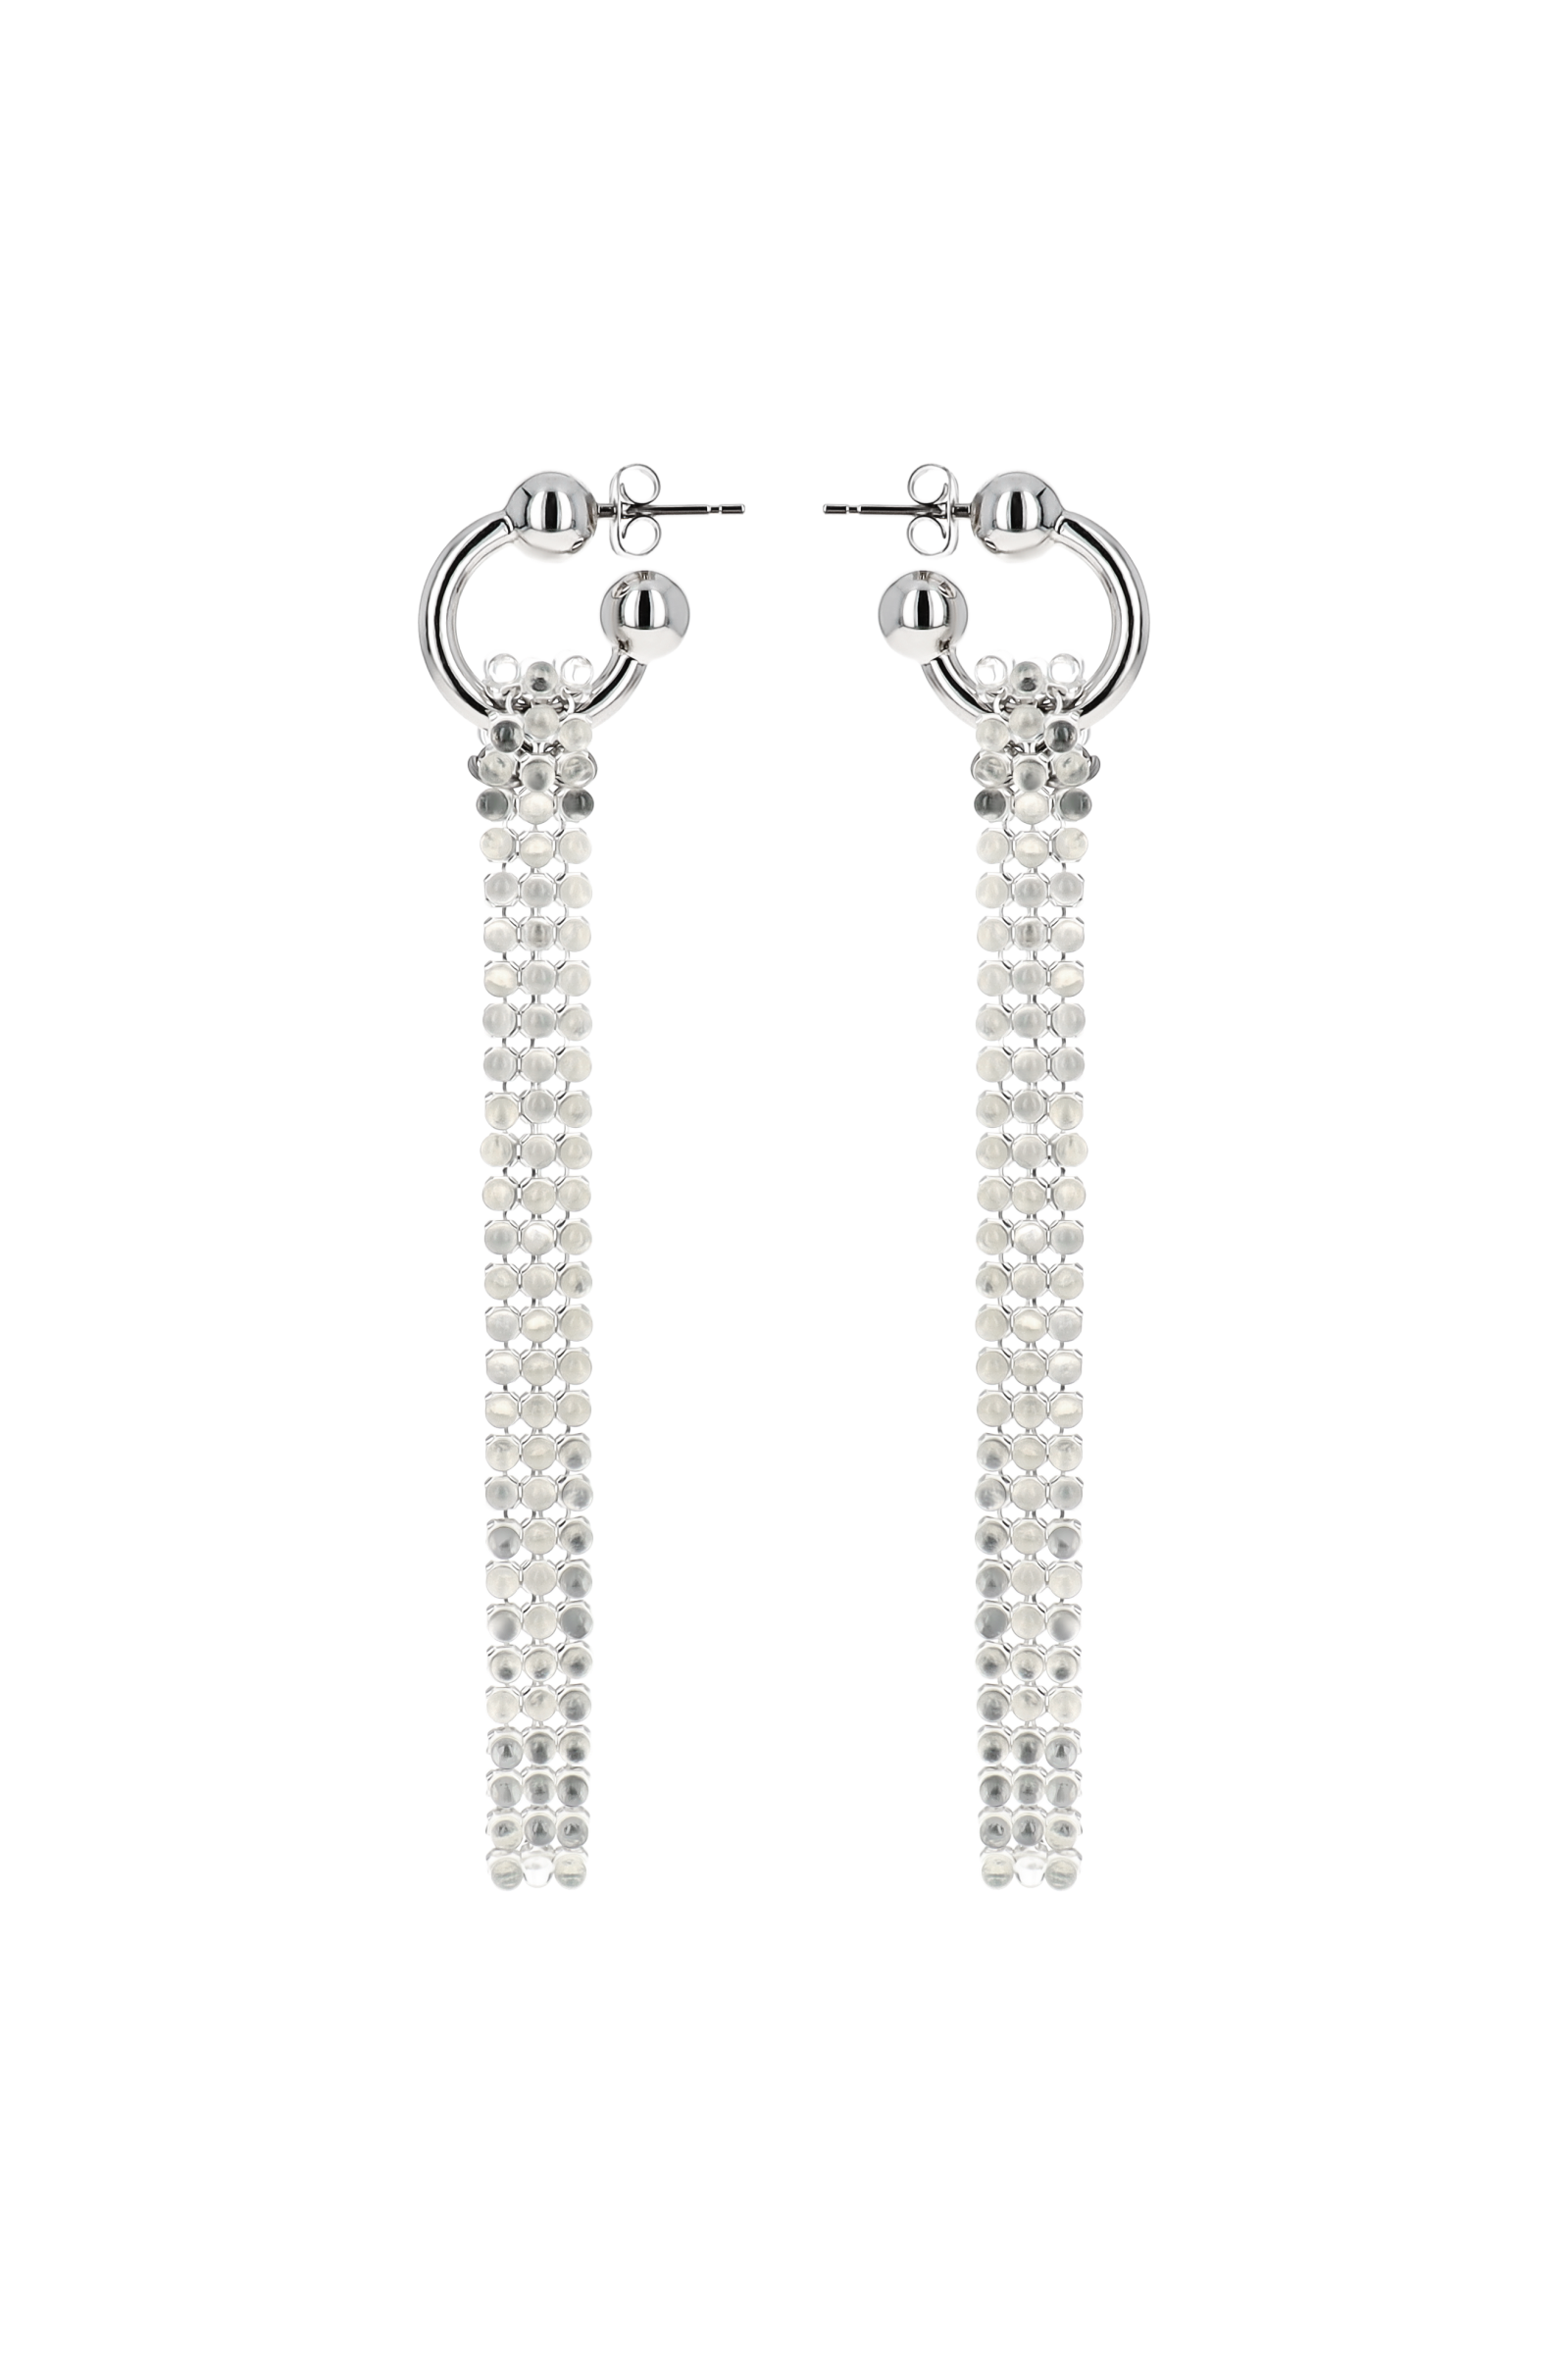 Justine Clenquet Rosemary Earrings